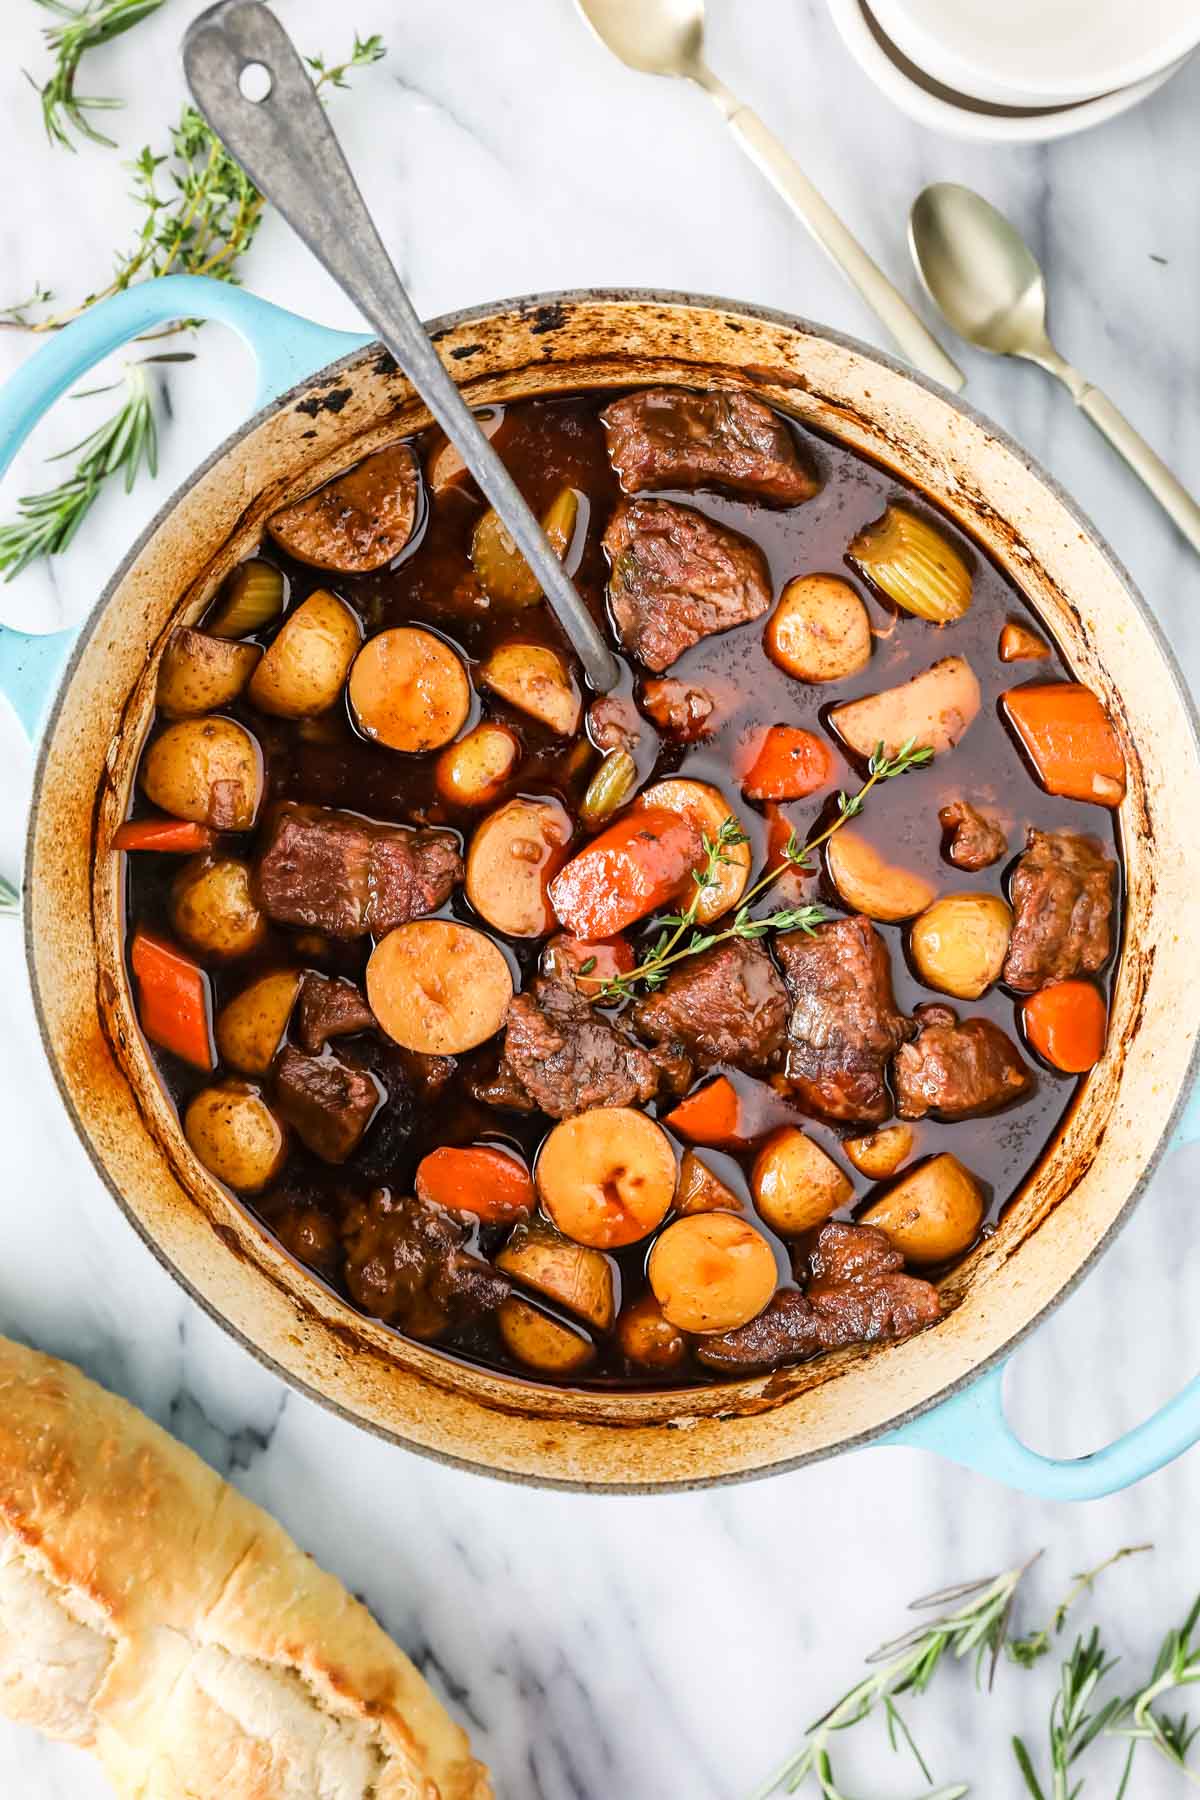 Overhead view of a pot of stew with chunks of beef, carrots, and potatoes.